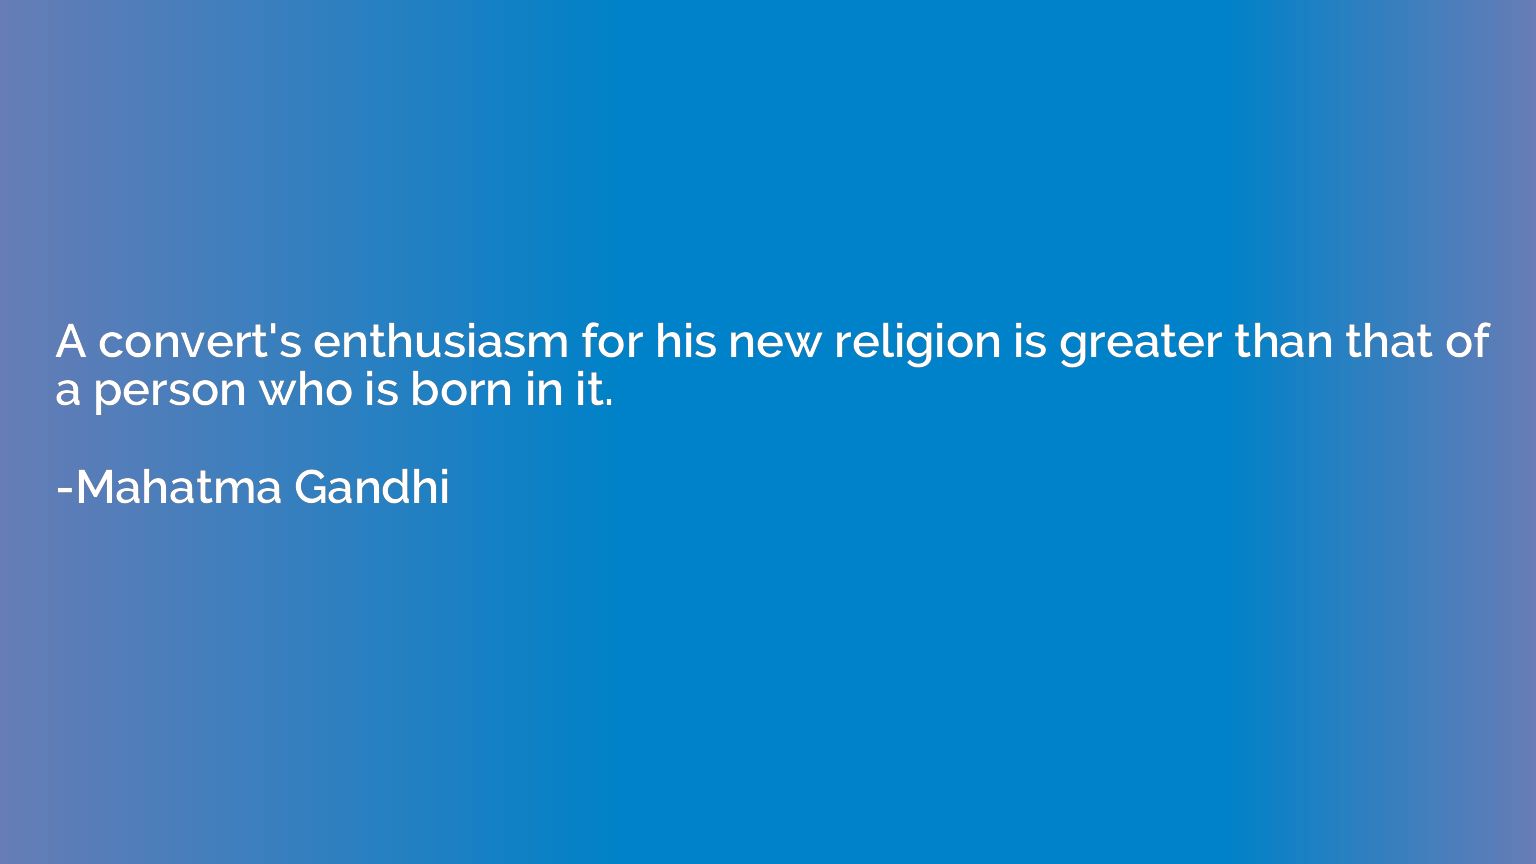 A convert's enthusiasm for his new religion is greater than 